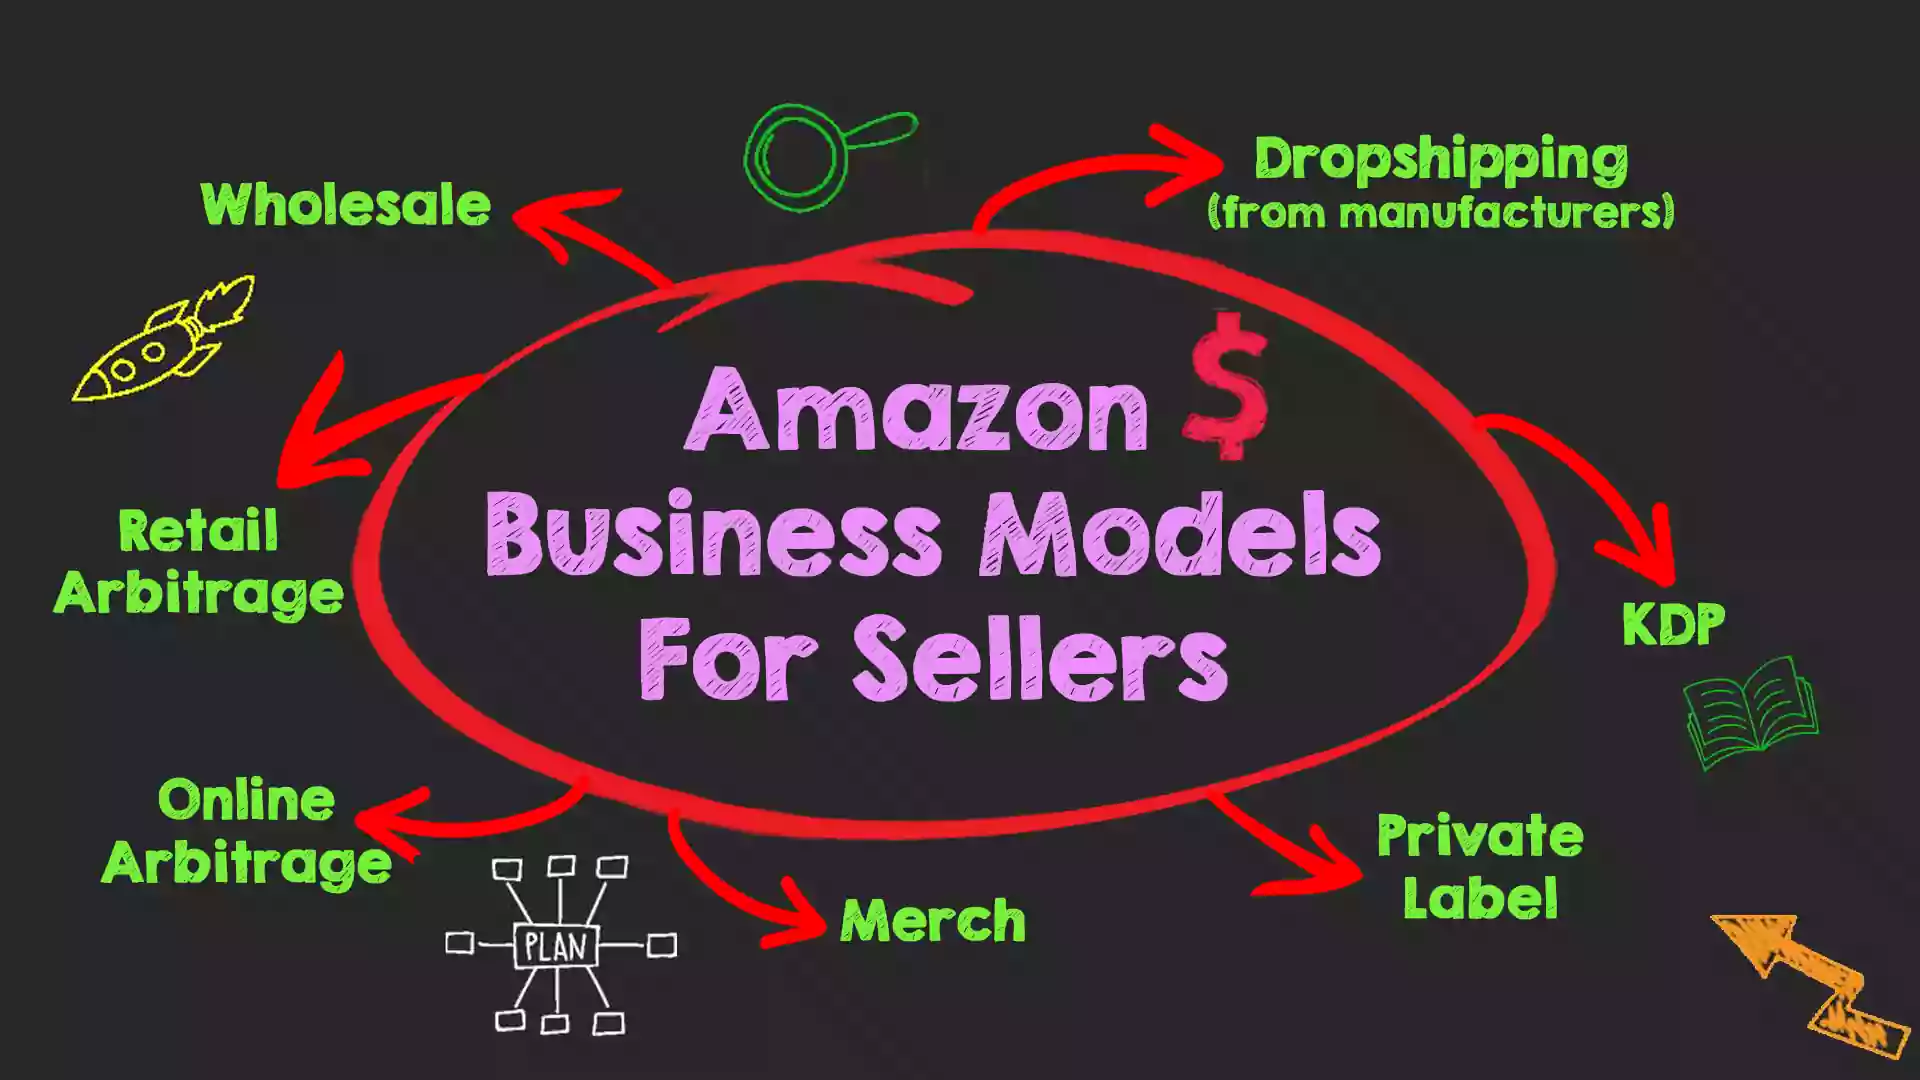 Amazon business models for sellers